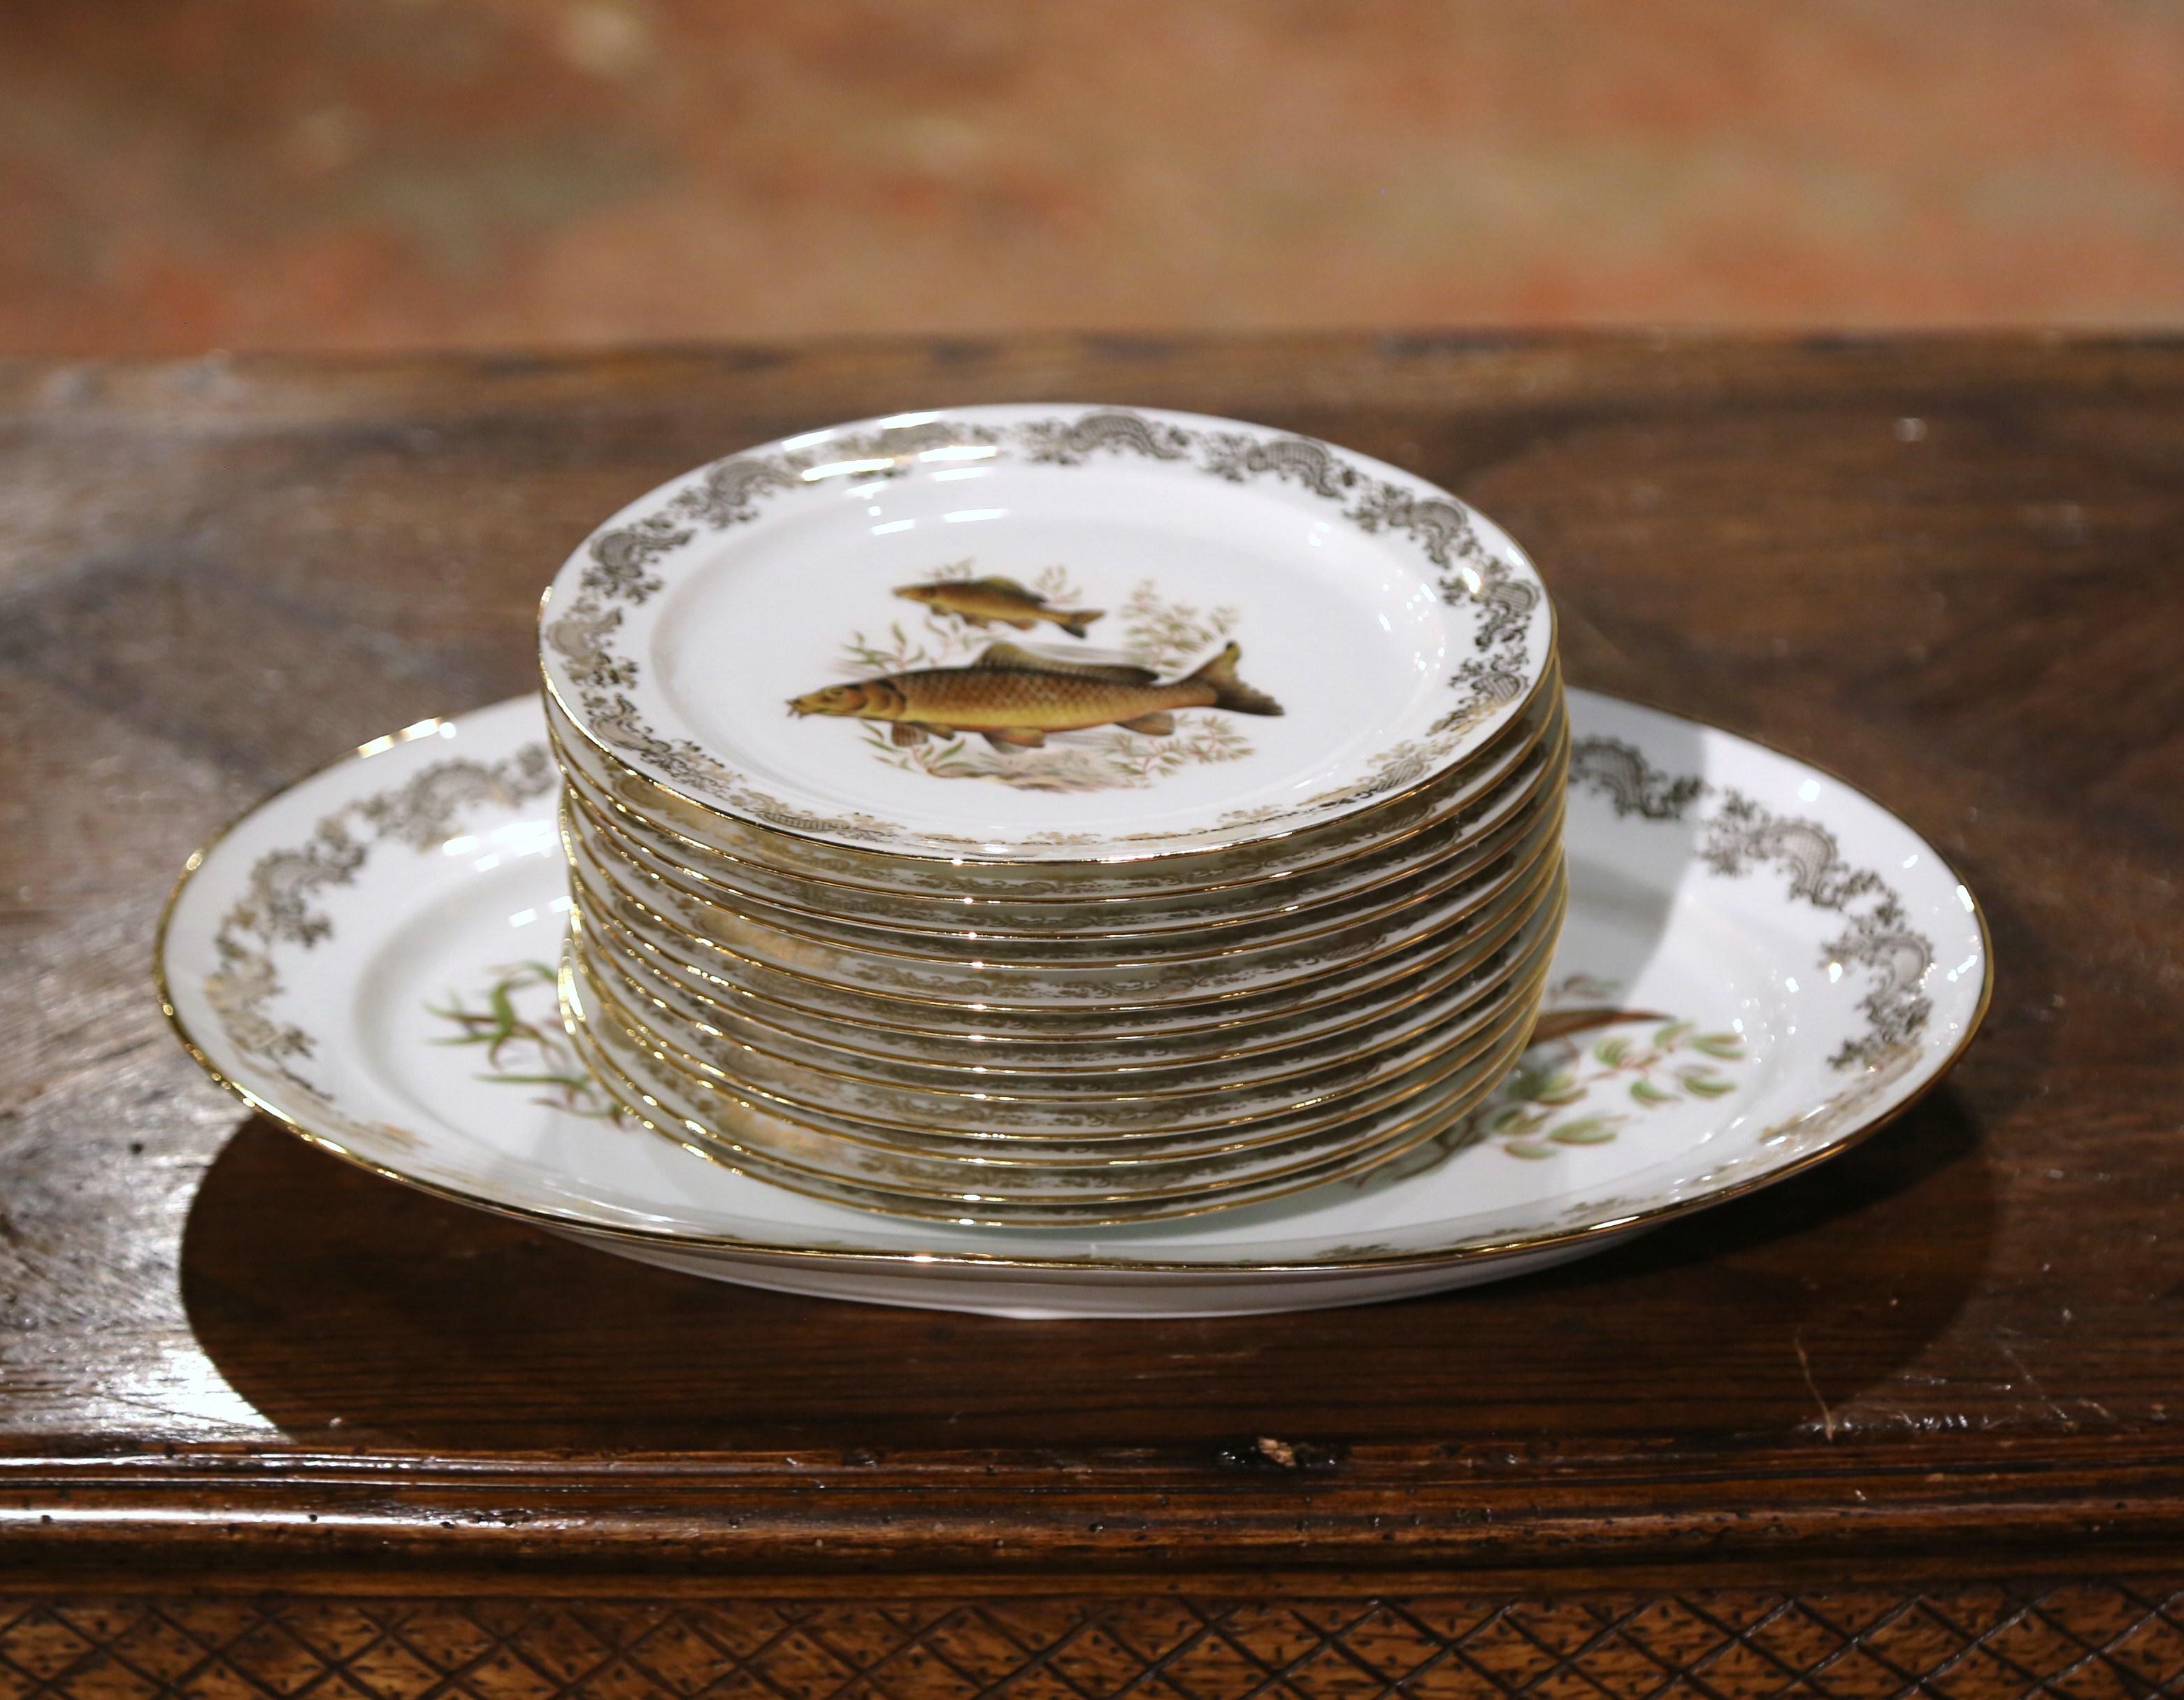 Decorate a vaisselier or a shelf with this colorful set of twelve (12) porcelain plates and matching platter. Crafted in Limoges France, and signed underfoot by the artist, Benoit, each piece is decorated with gilt floral lace border, and features